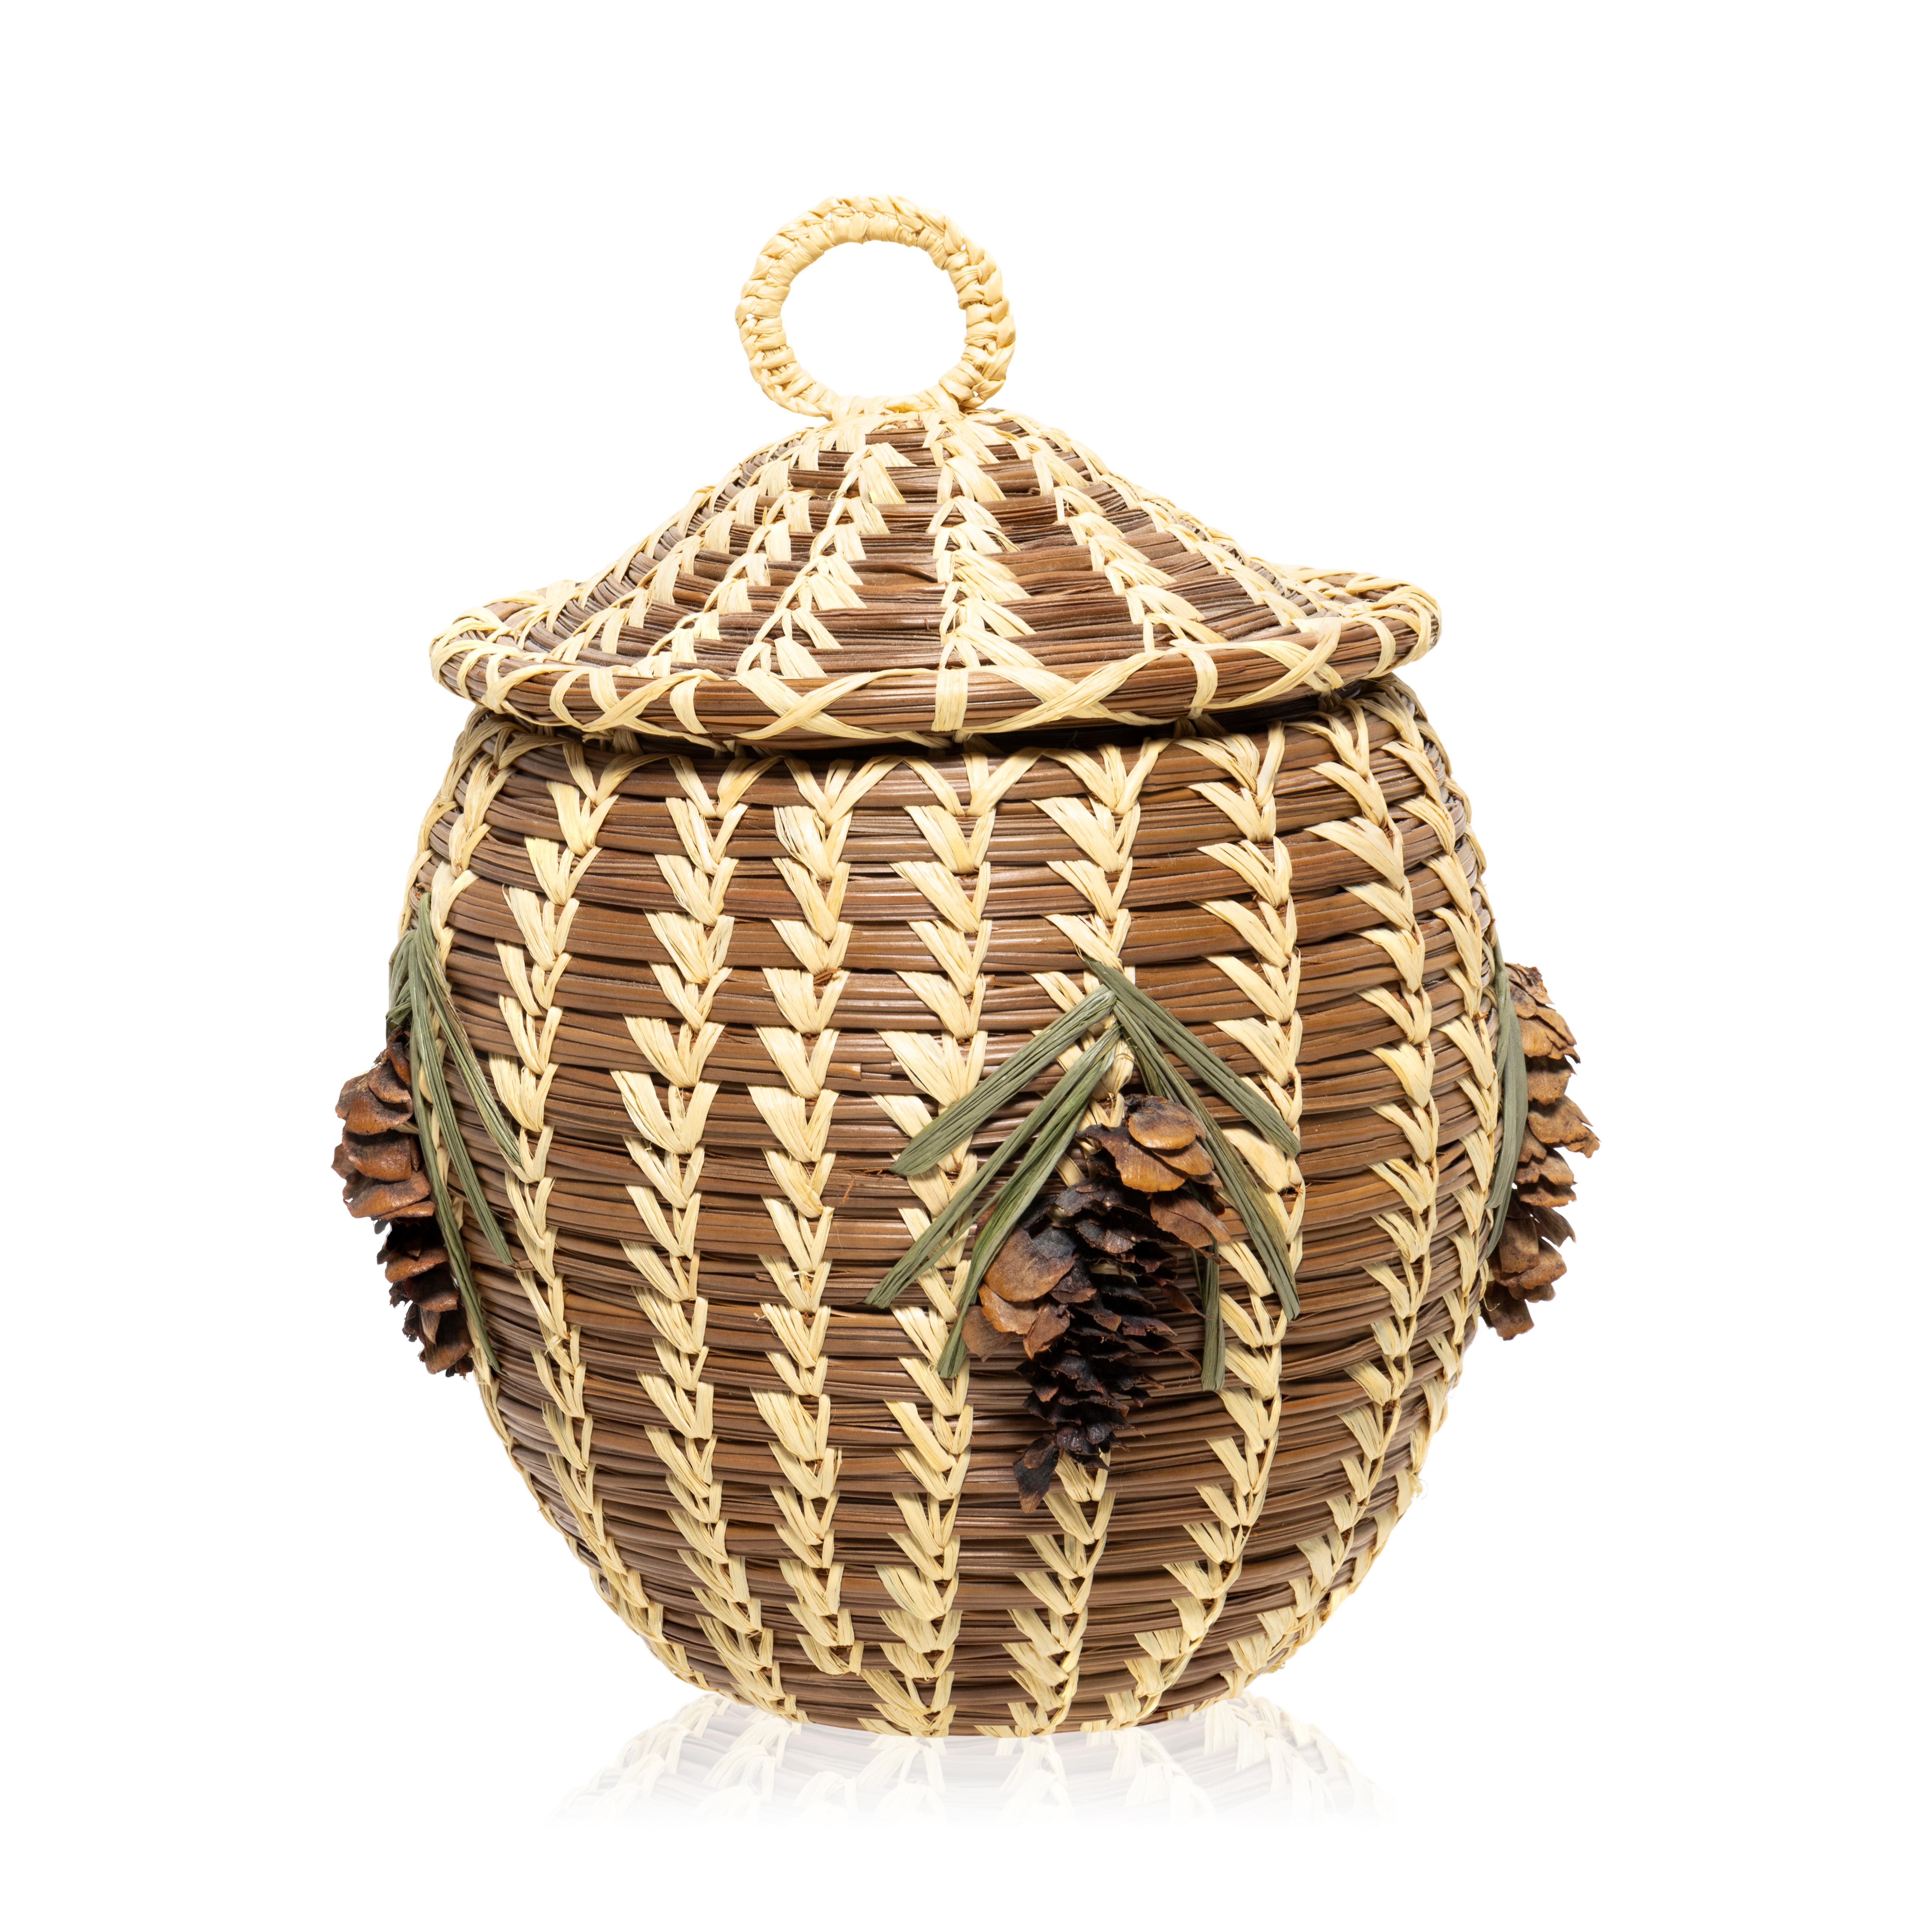 Coushatta lidded pine needle basket with pine cone and needle décor two sides and top. This woven by L.C. John, the last of the great Coushatta basket makers. This basket is made from longleaf pine needles native to the state stitched with raffia